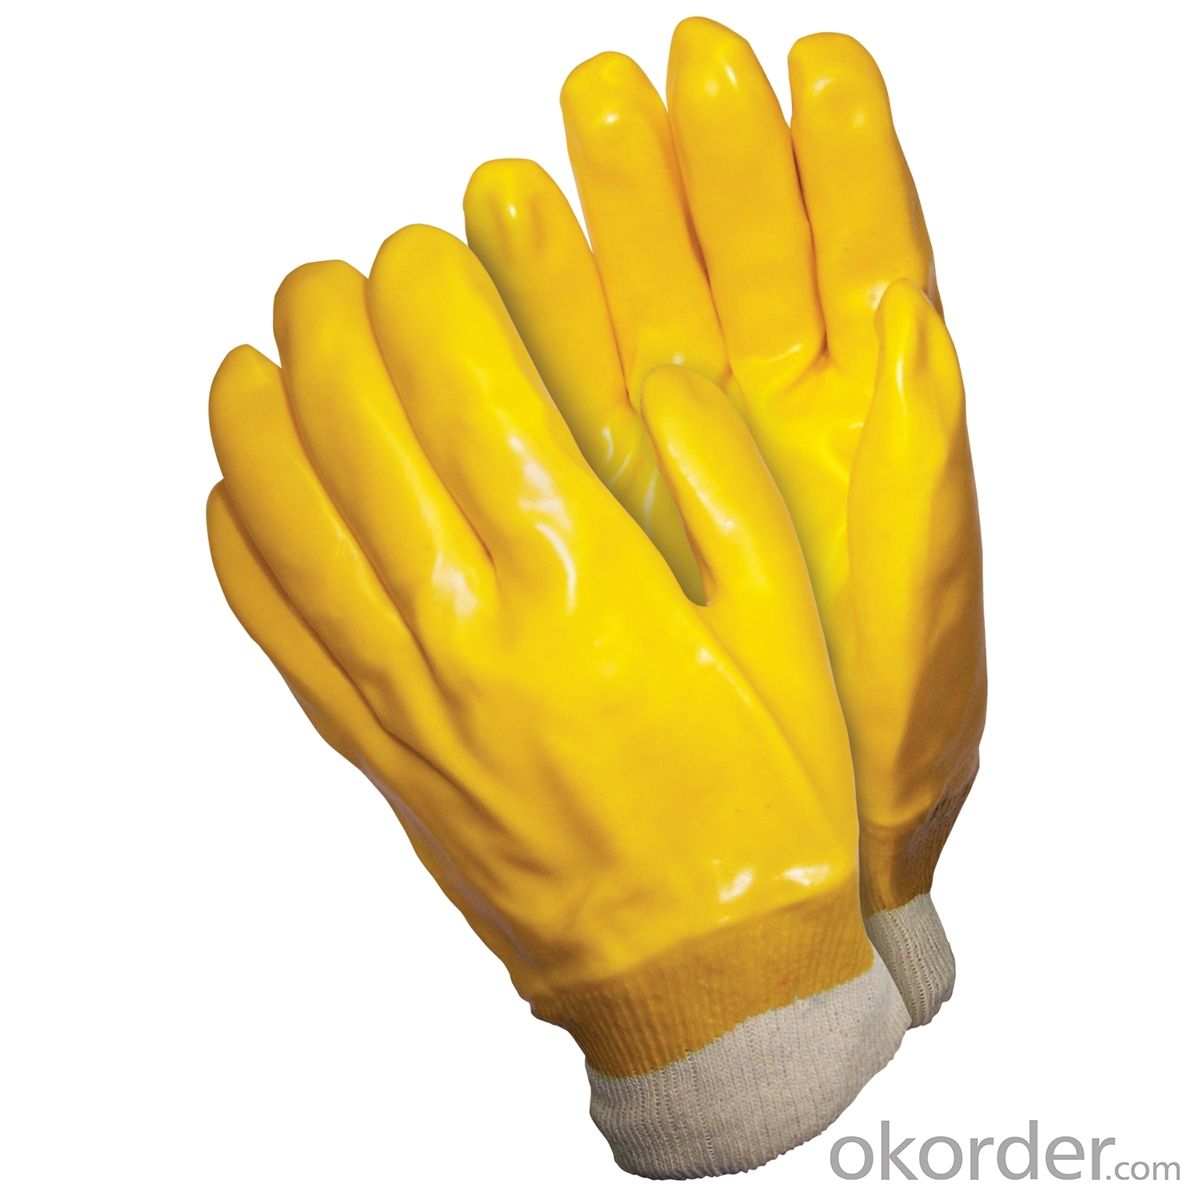 M101-01 yellow PVC Coated smooth knit wrist glove for working